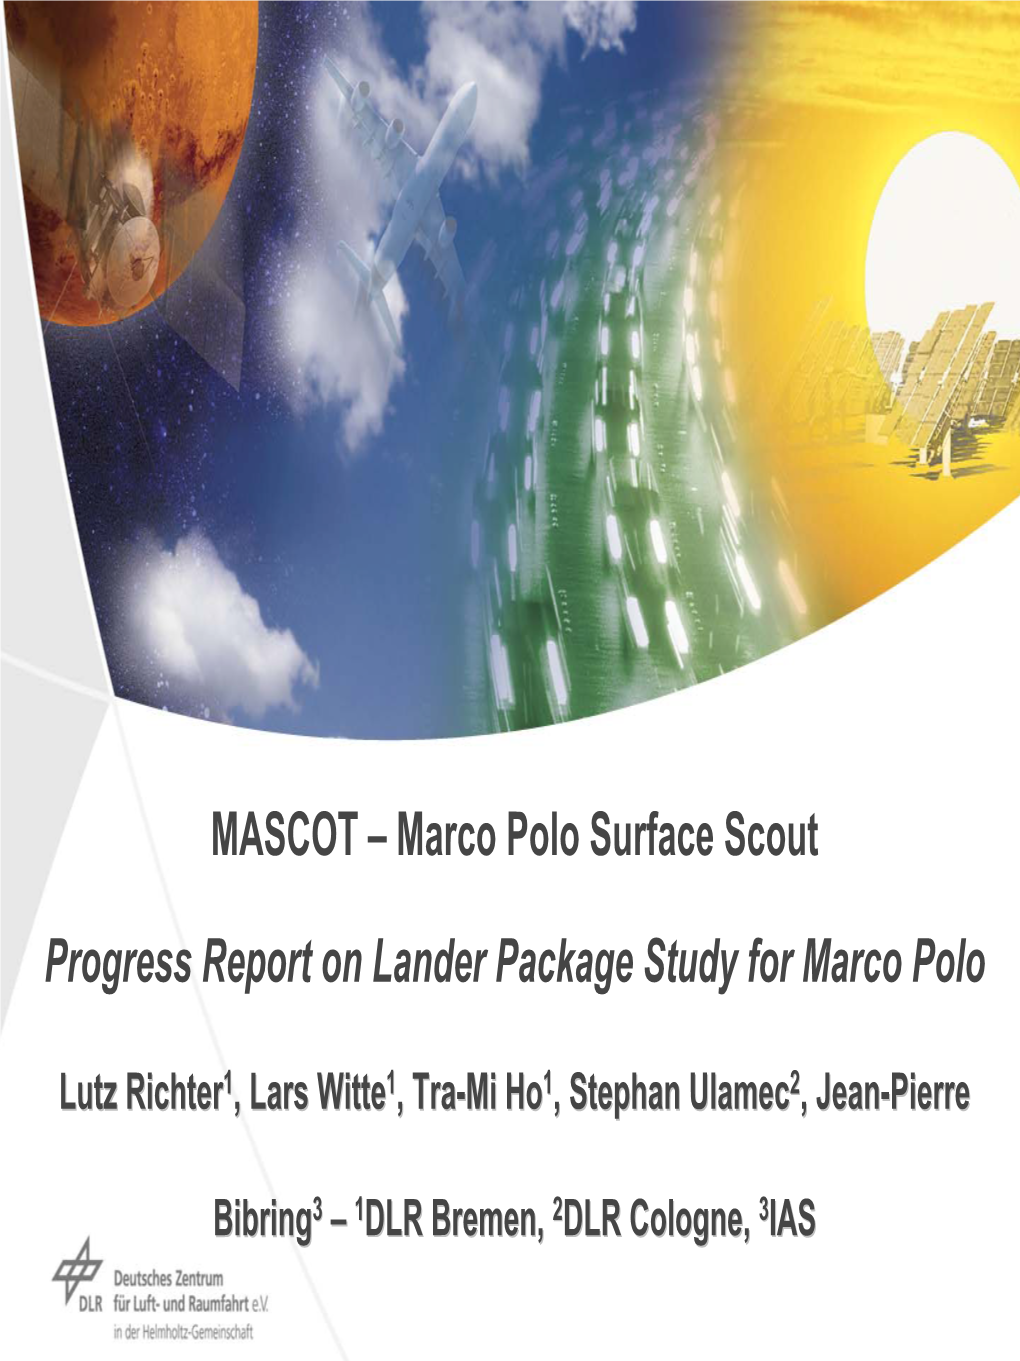 MASCOT – Marco Polo Surface Scout